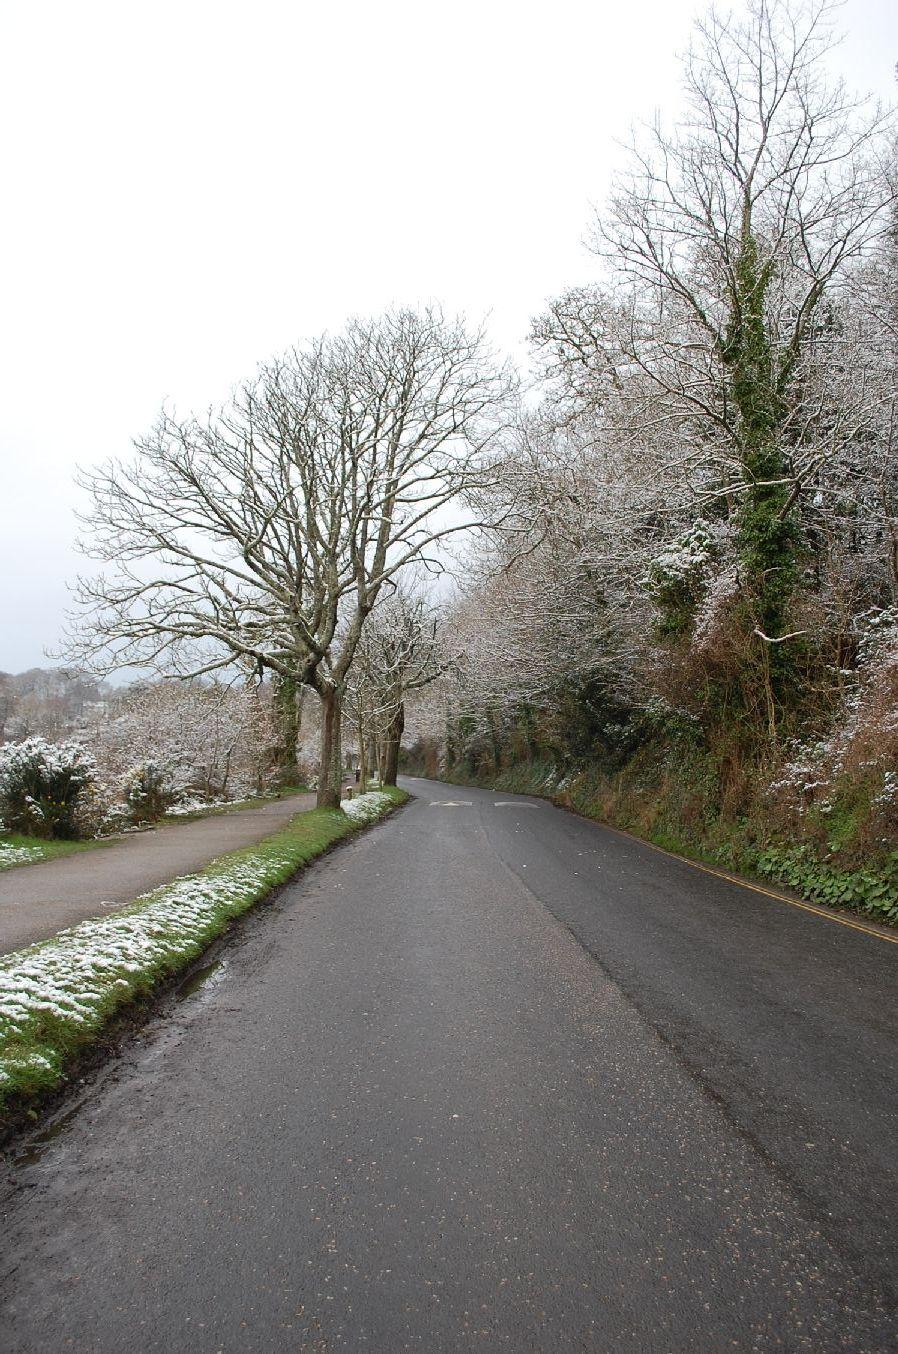 The road past Swanpool, Falmouth